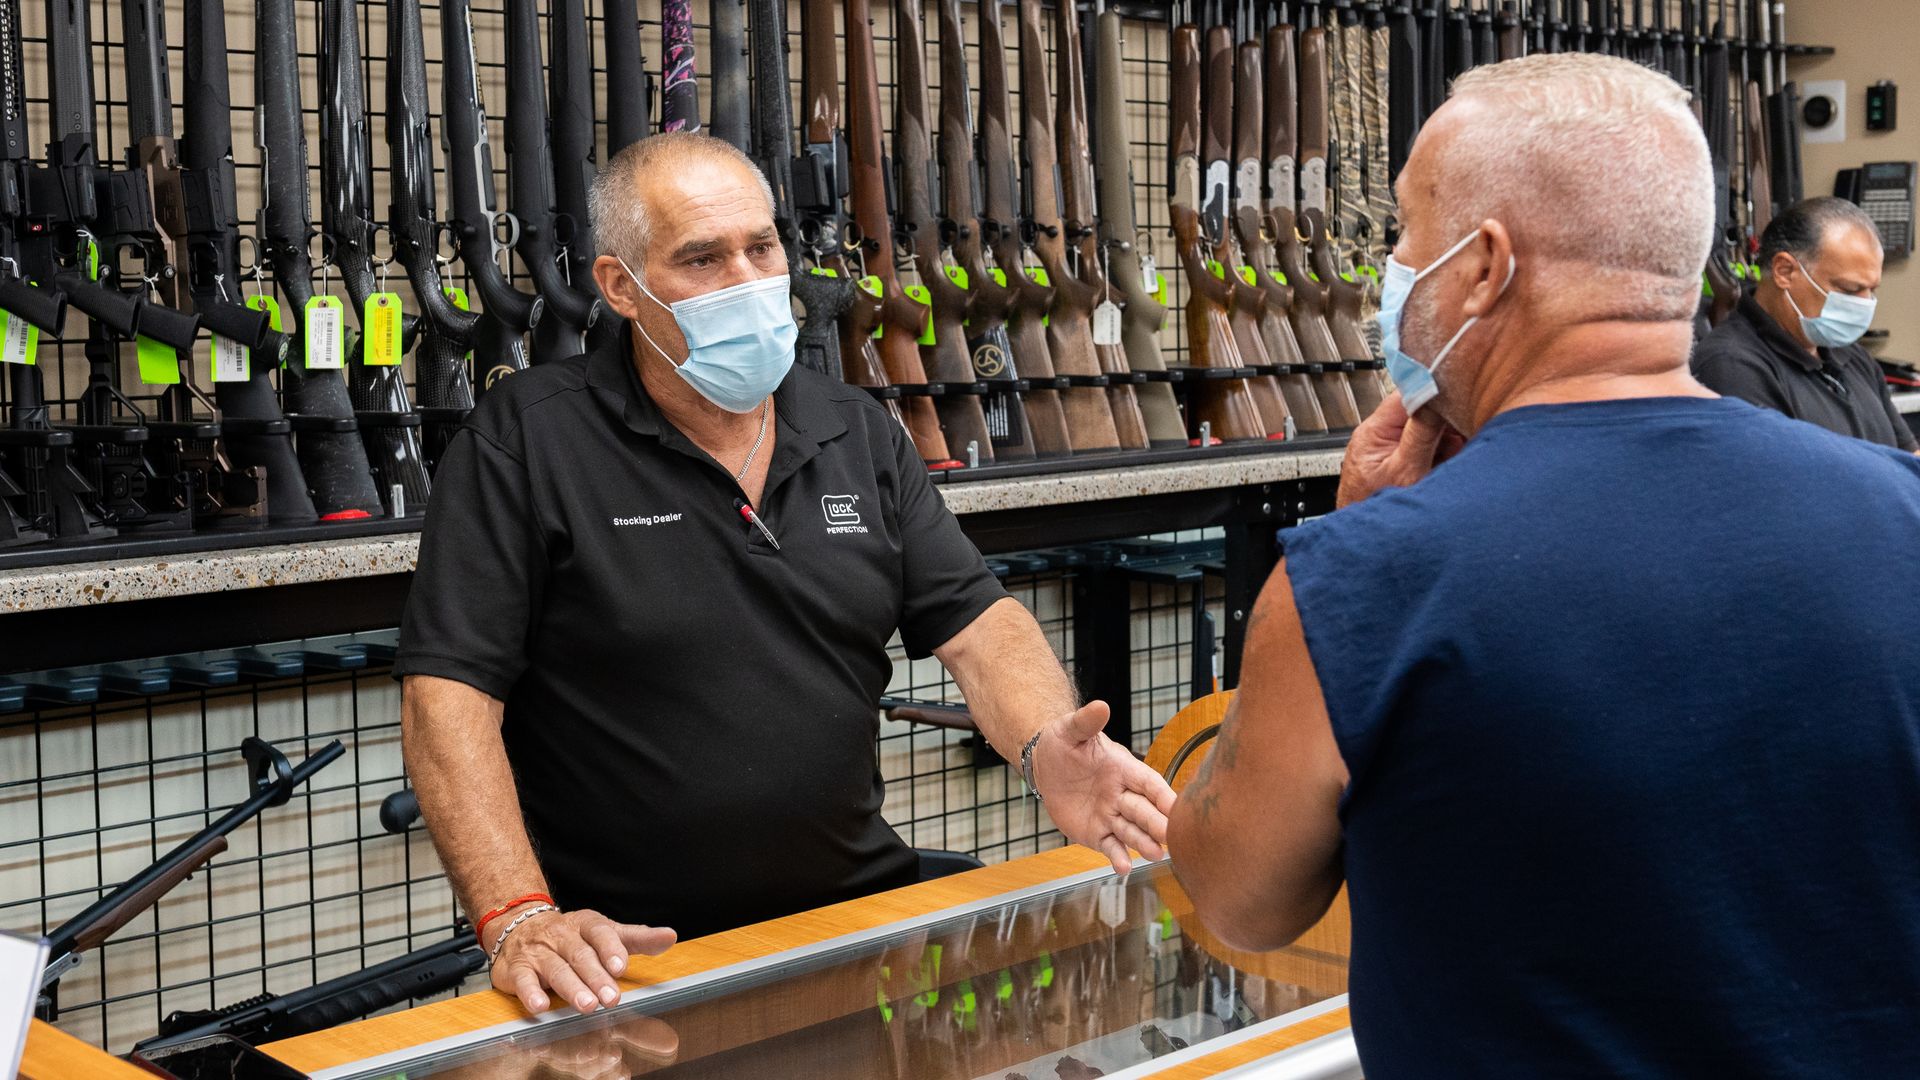 A gun shop employee speaks to a customer while wearing a face mask